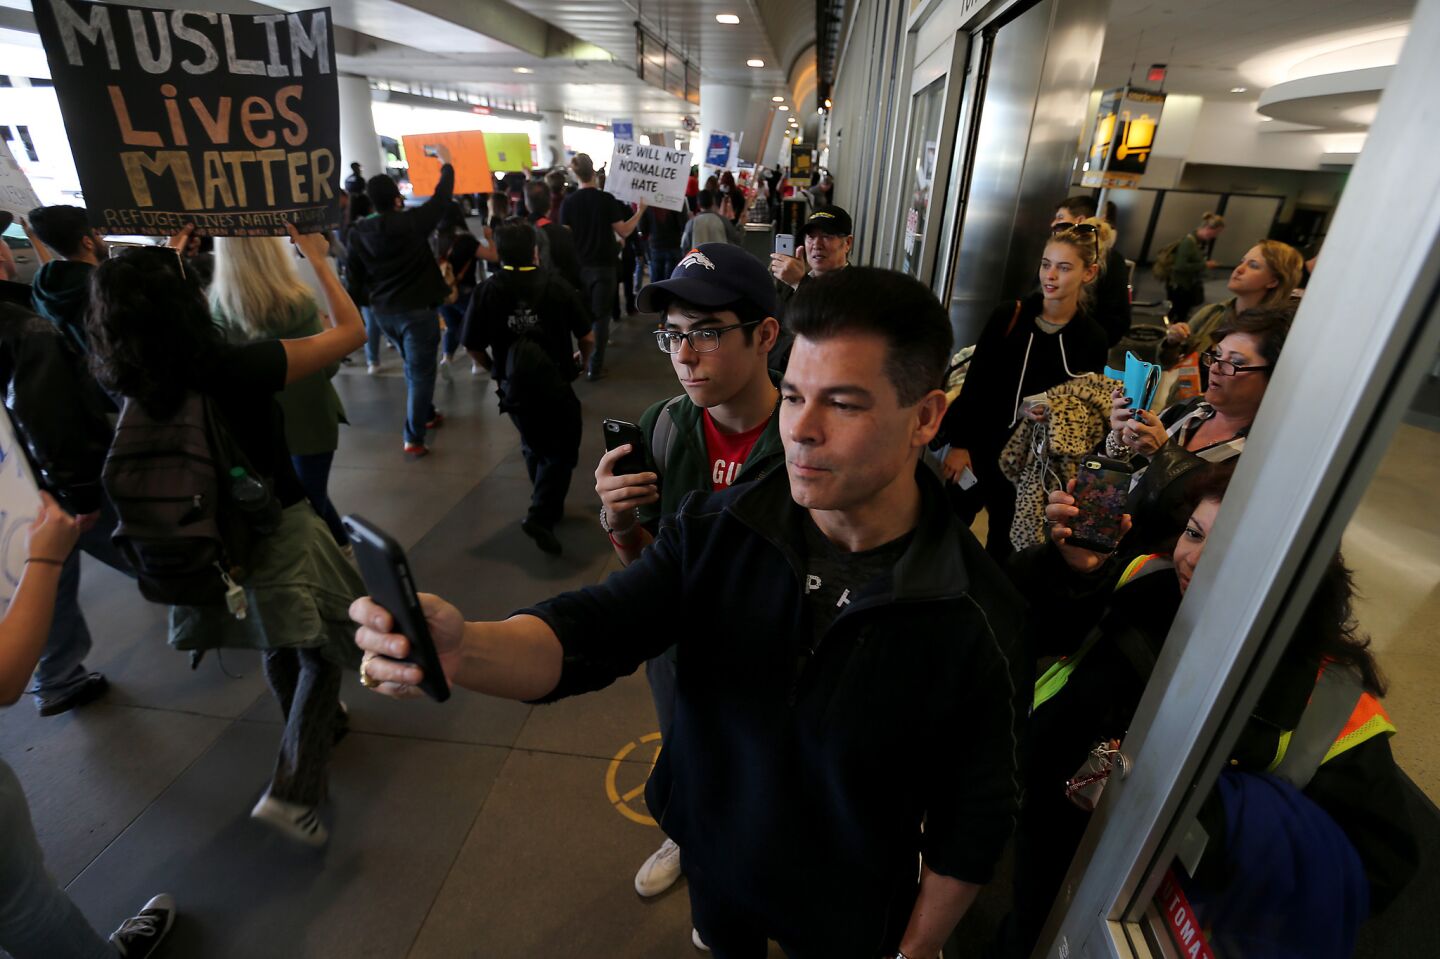 Passengers stand in the doorway of a baggage claim area to take pictures and video of marchers protesting the immigration ban of President Trump at LAX on Saturday.